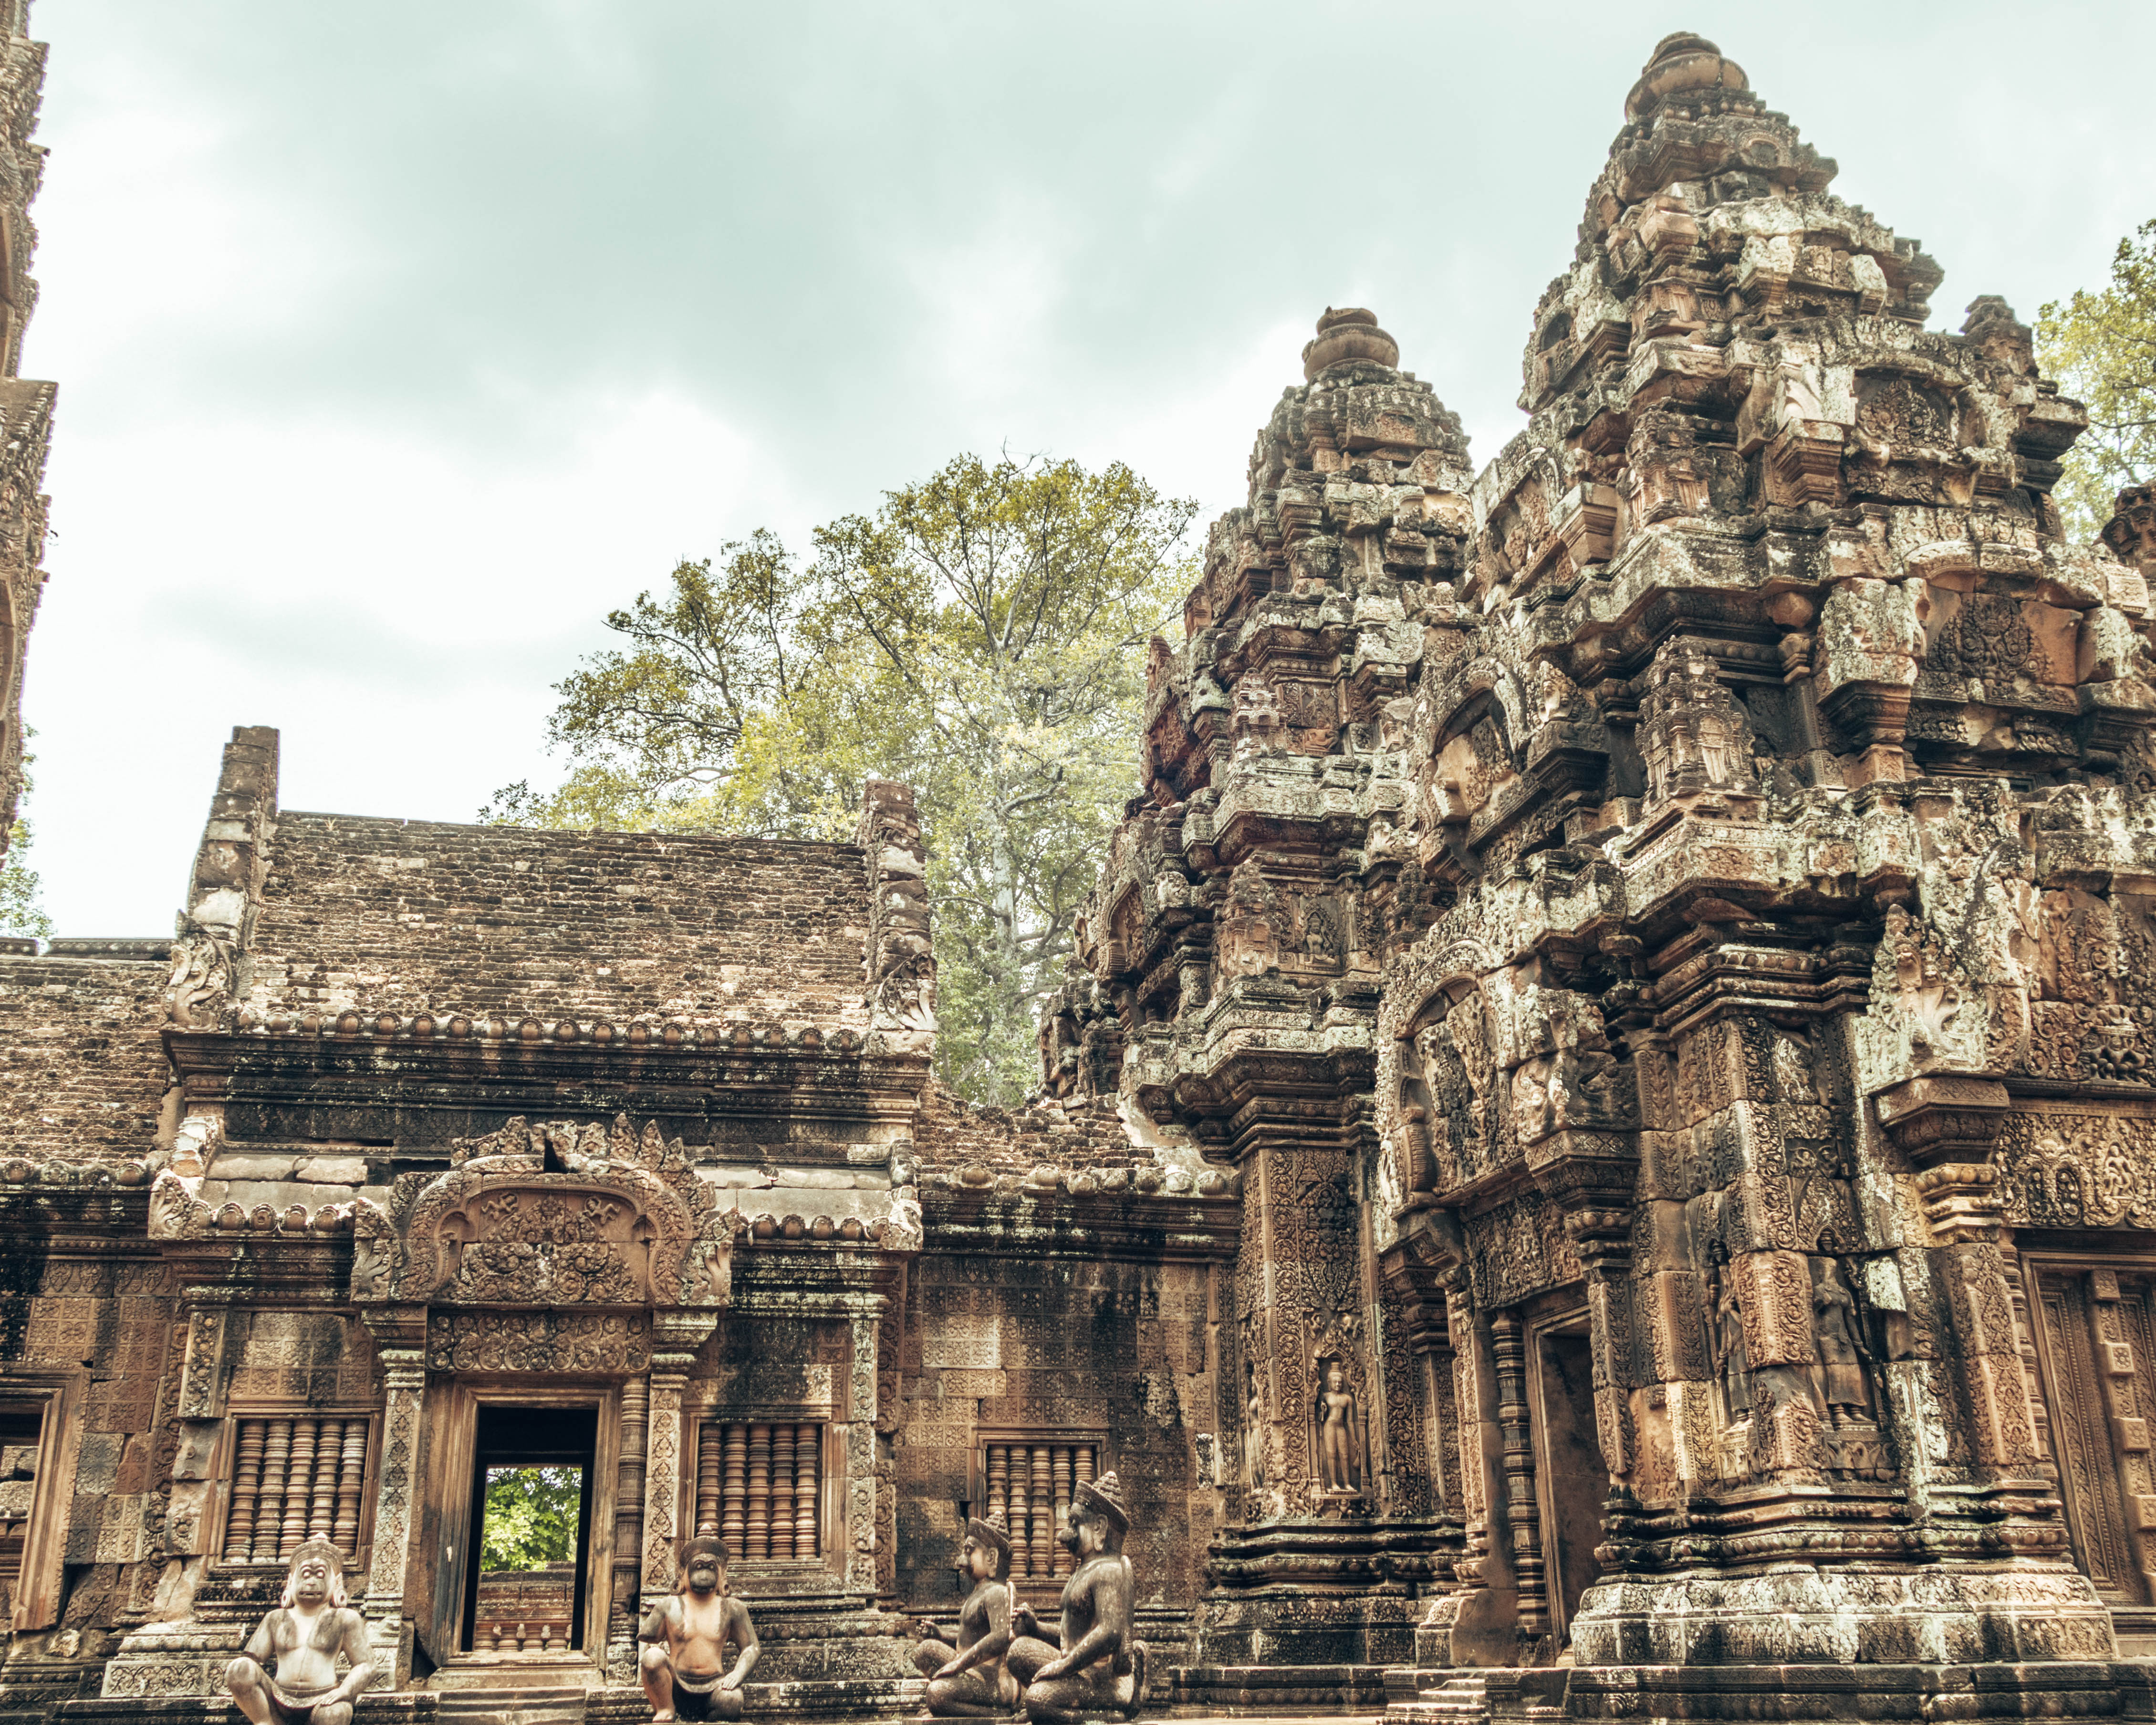 The beautiful temples of Angkor Wat - WeDidItOurWay.com